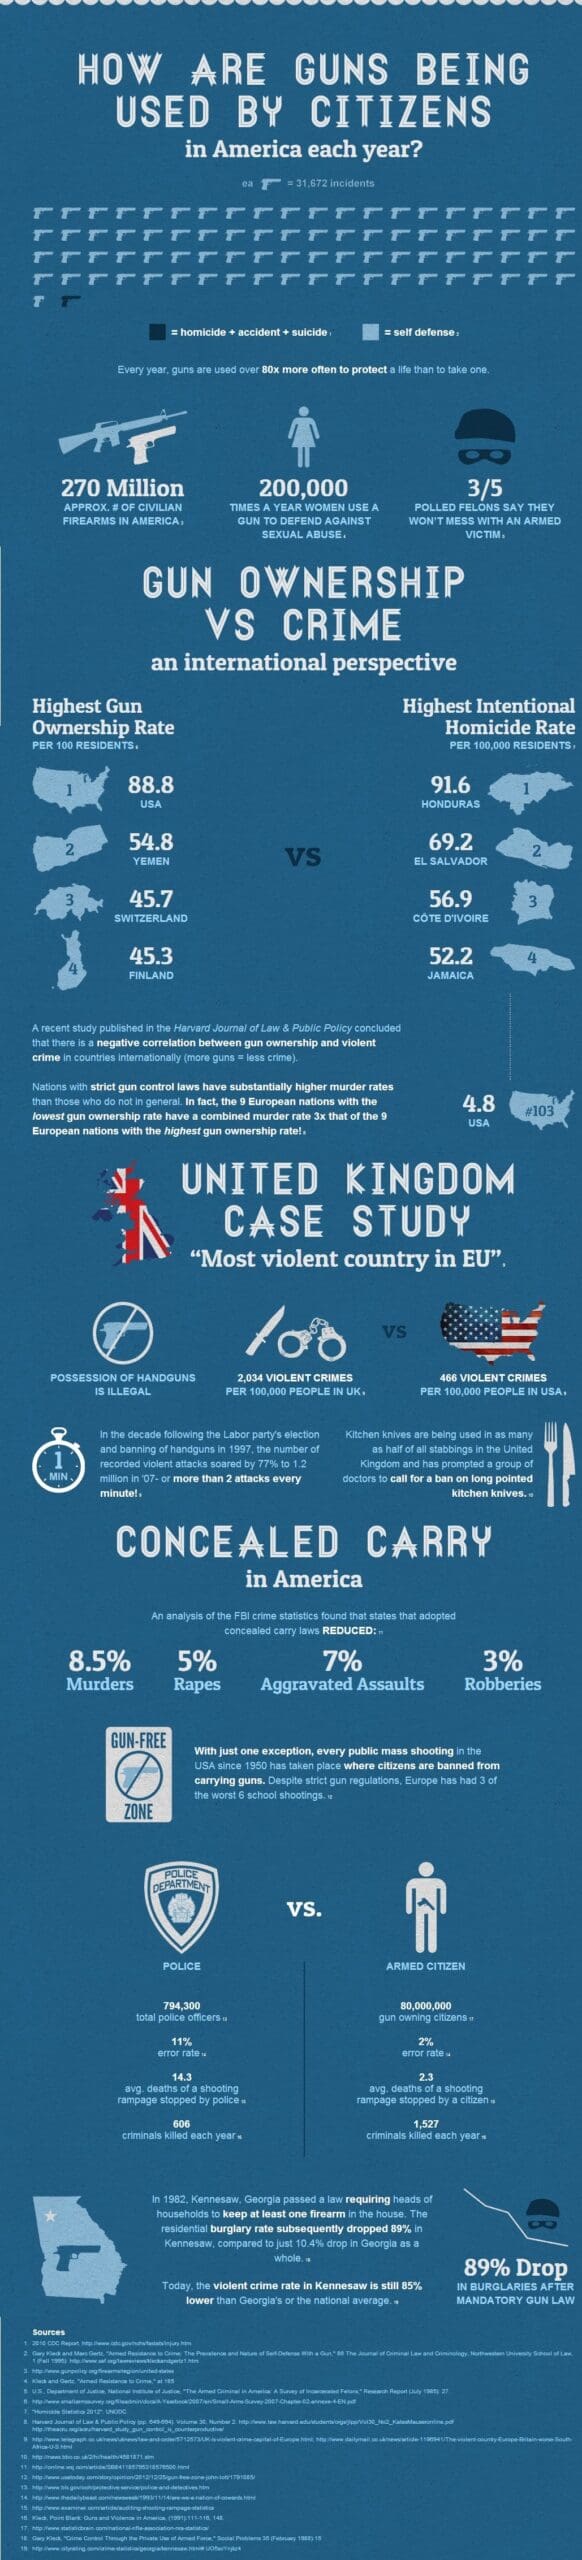 how_are_guns_used_by_citizensvia-infothread-dot-org